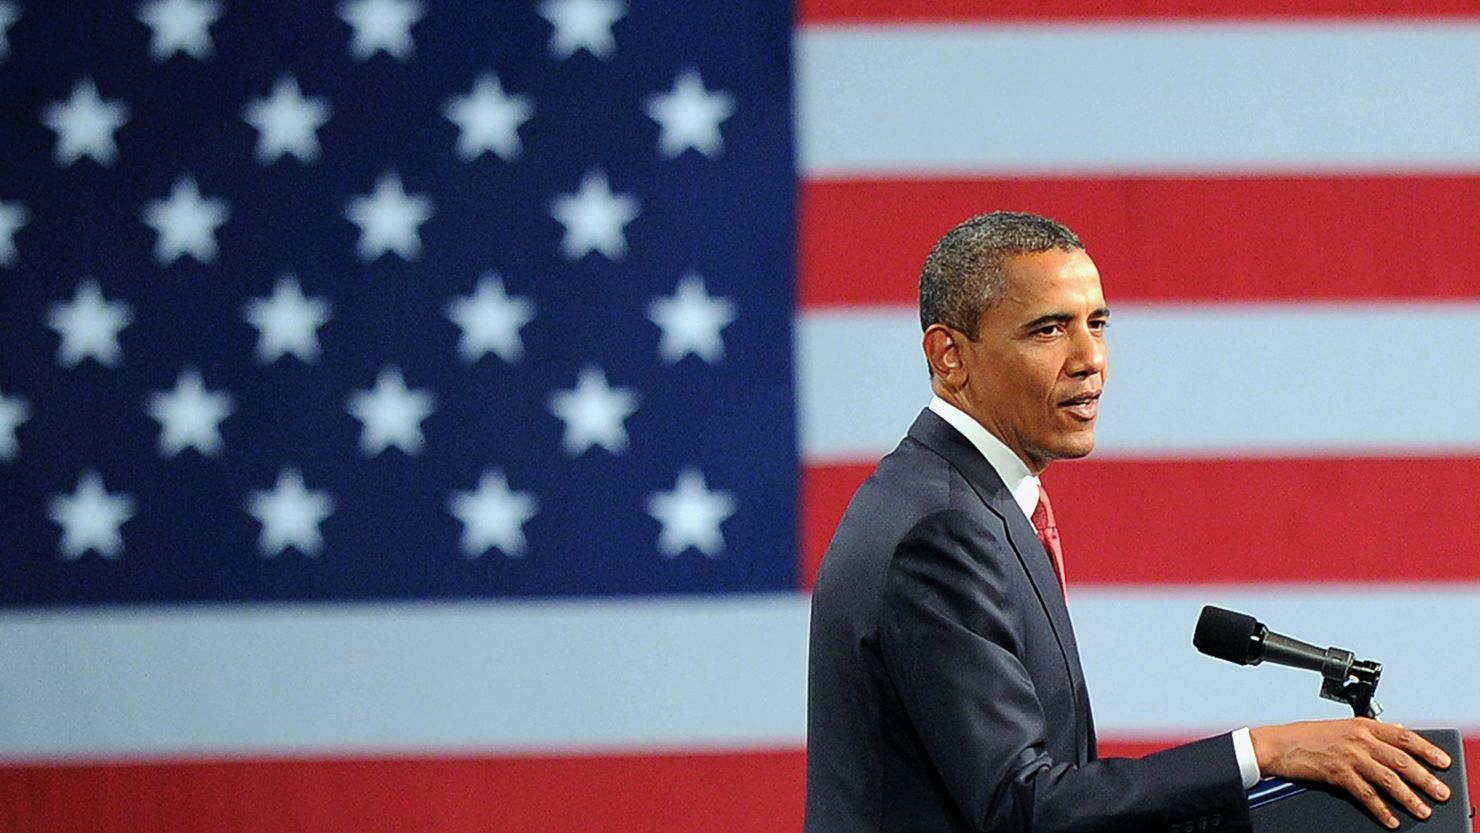 President Obama speaks during a campaign event at the Washington Convention Center last week.